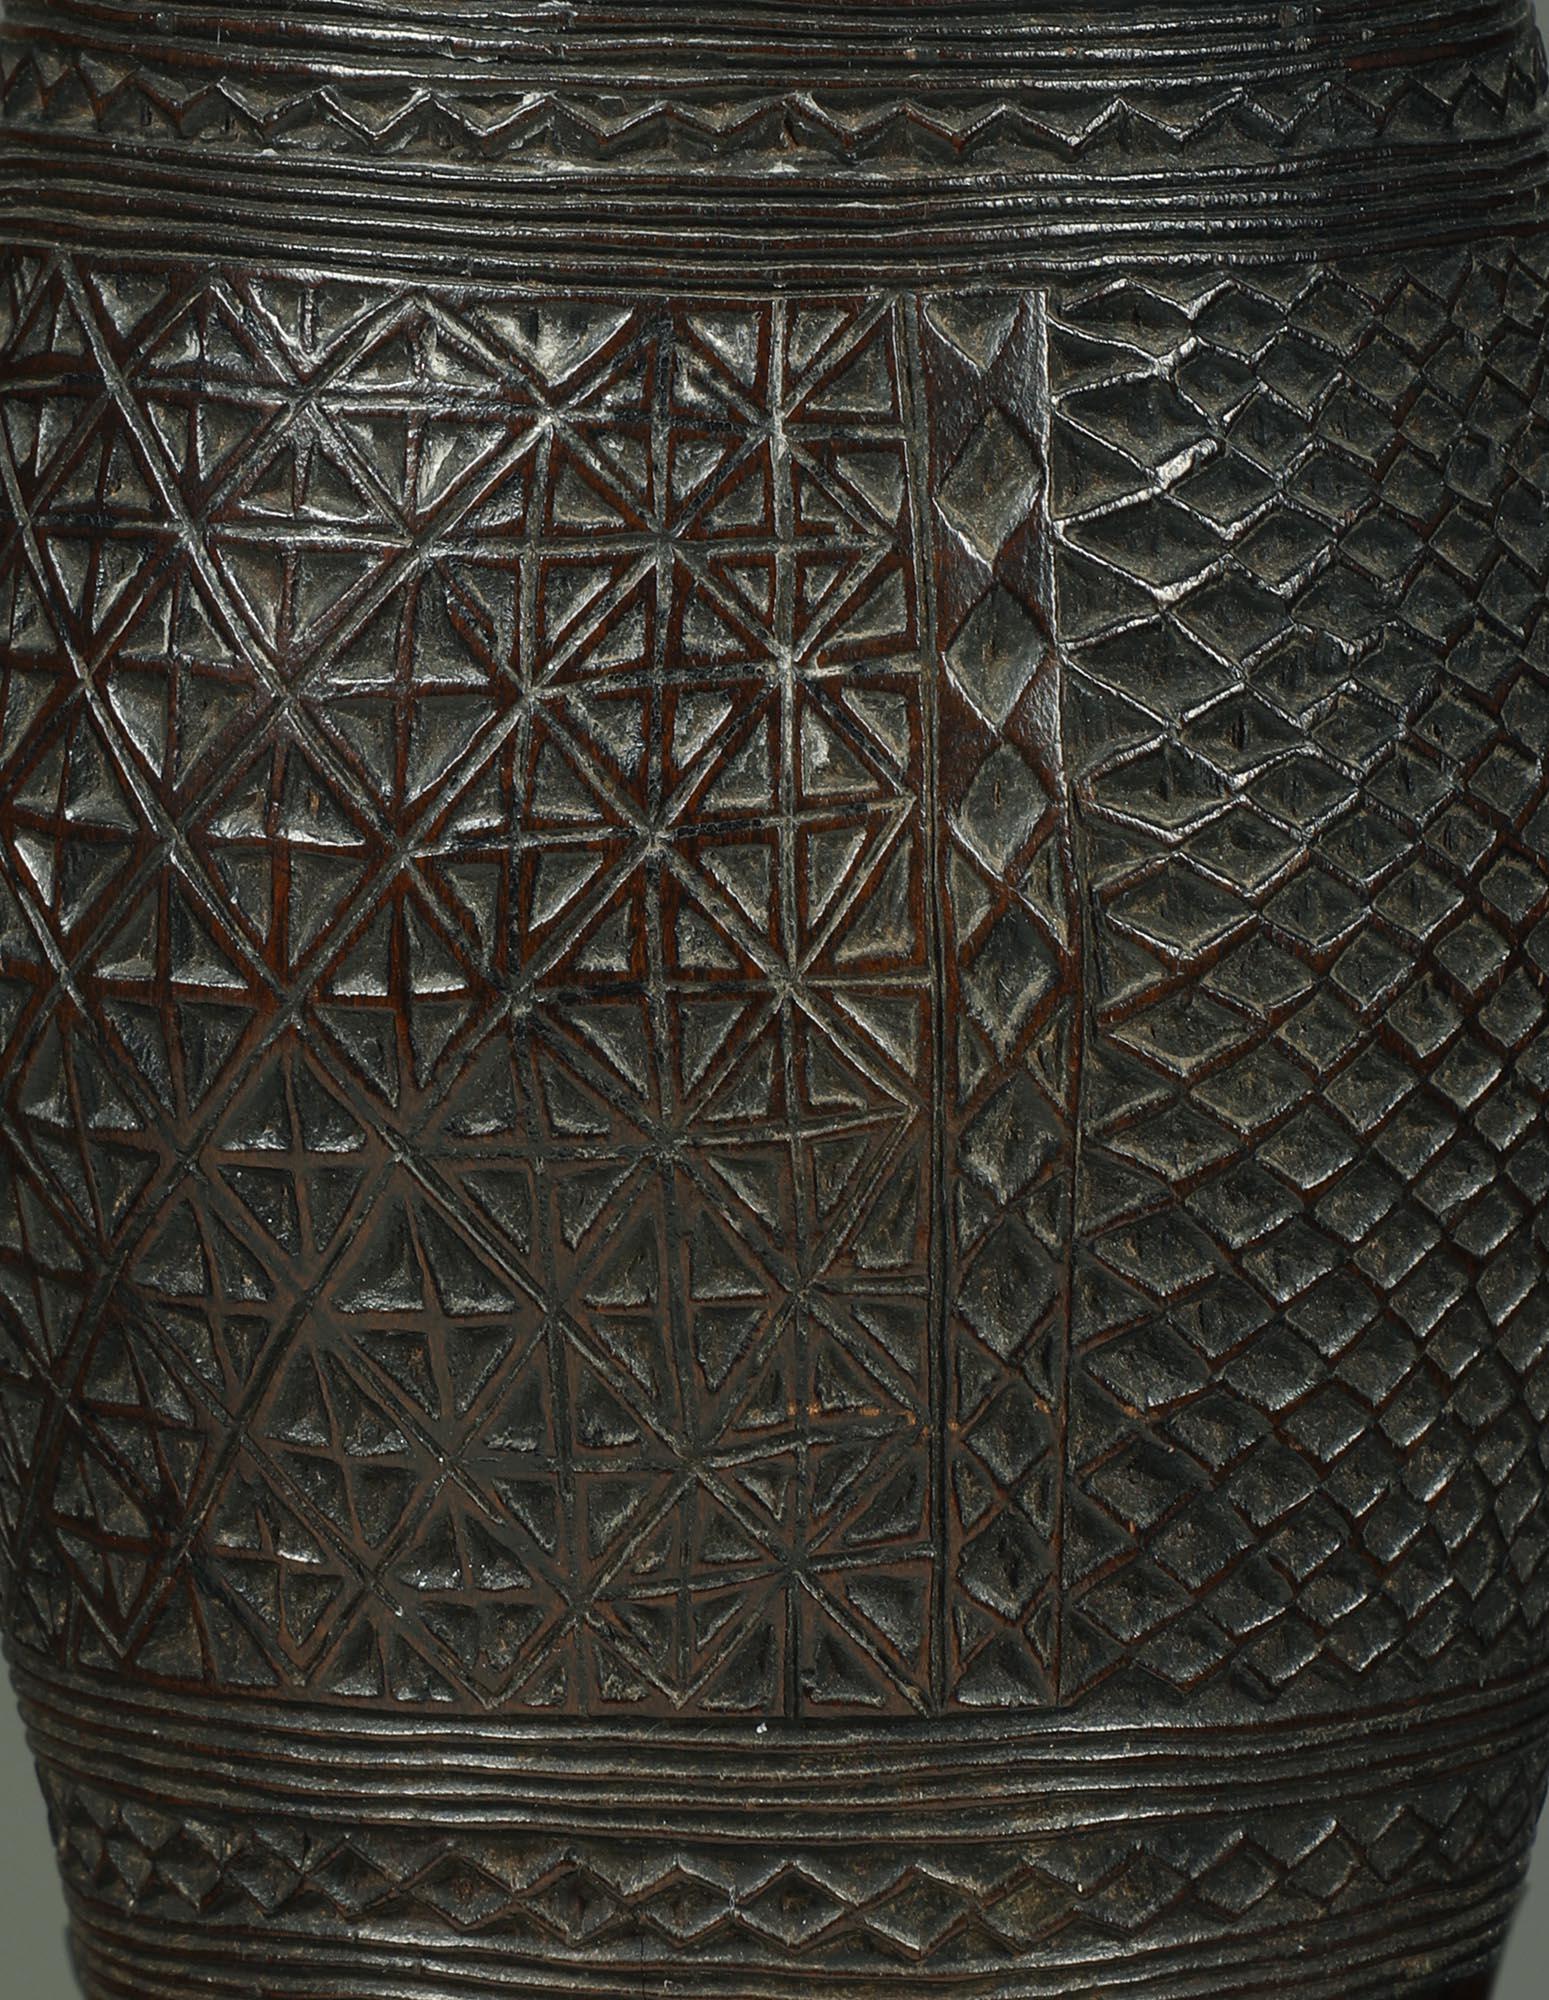 Hand-Carved Fine Kuba Cup with Incised Textile Designs, early 20th century Central Africa  For Sale